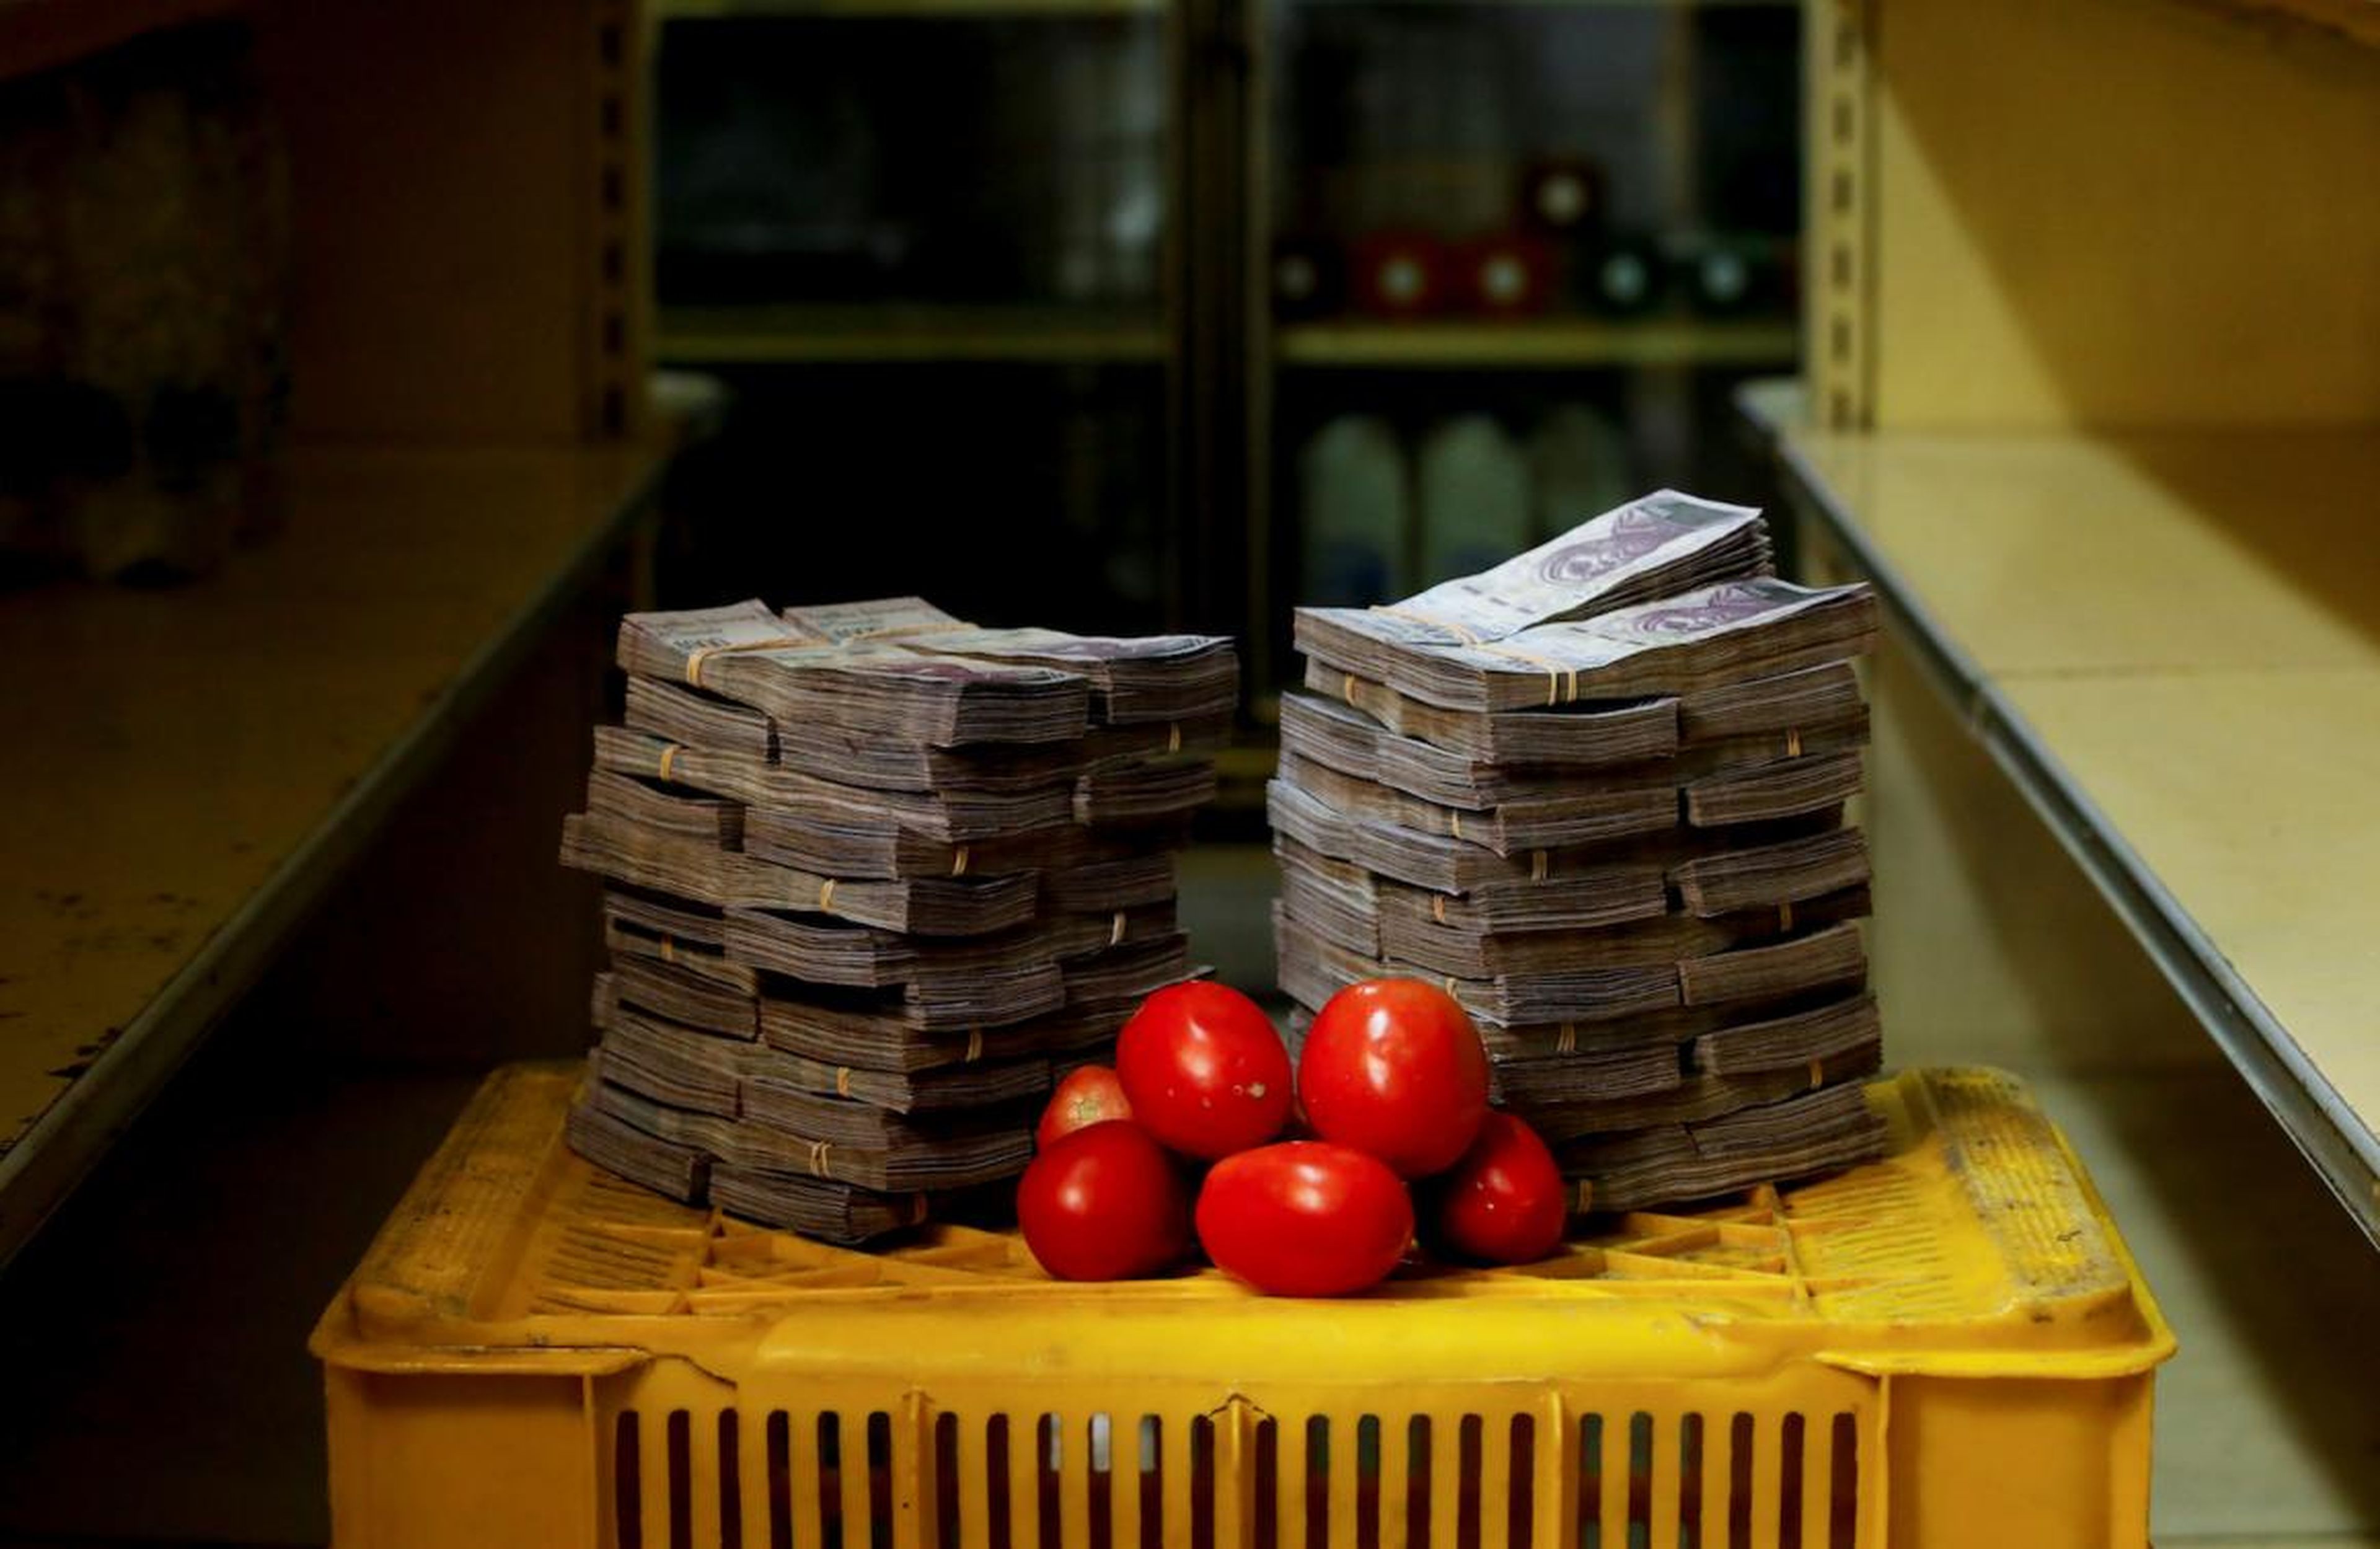 A kilogram of tomatoes next to 5 million bolívars, its price and the equivalent of $0.76, at a mini-market in Caracas, Venezuela.